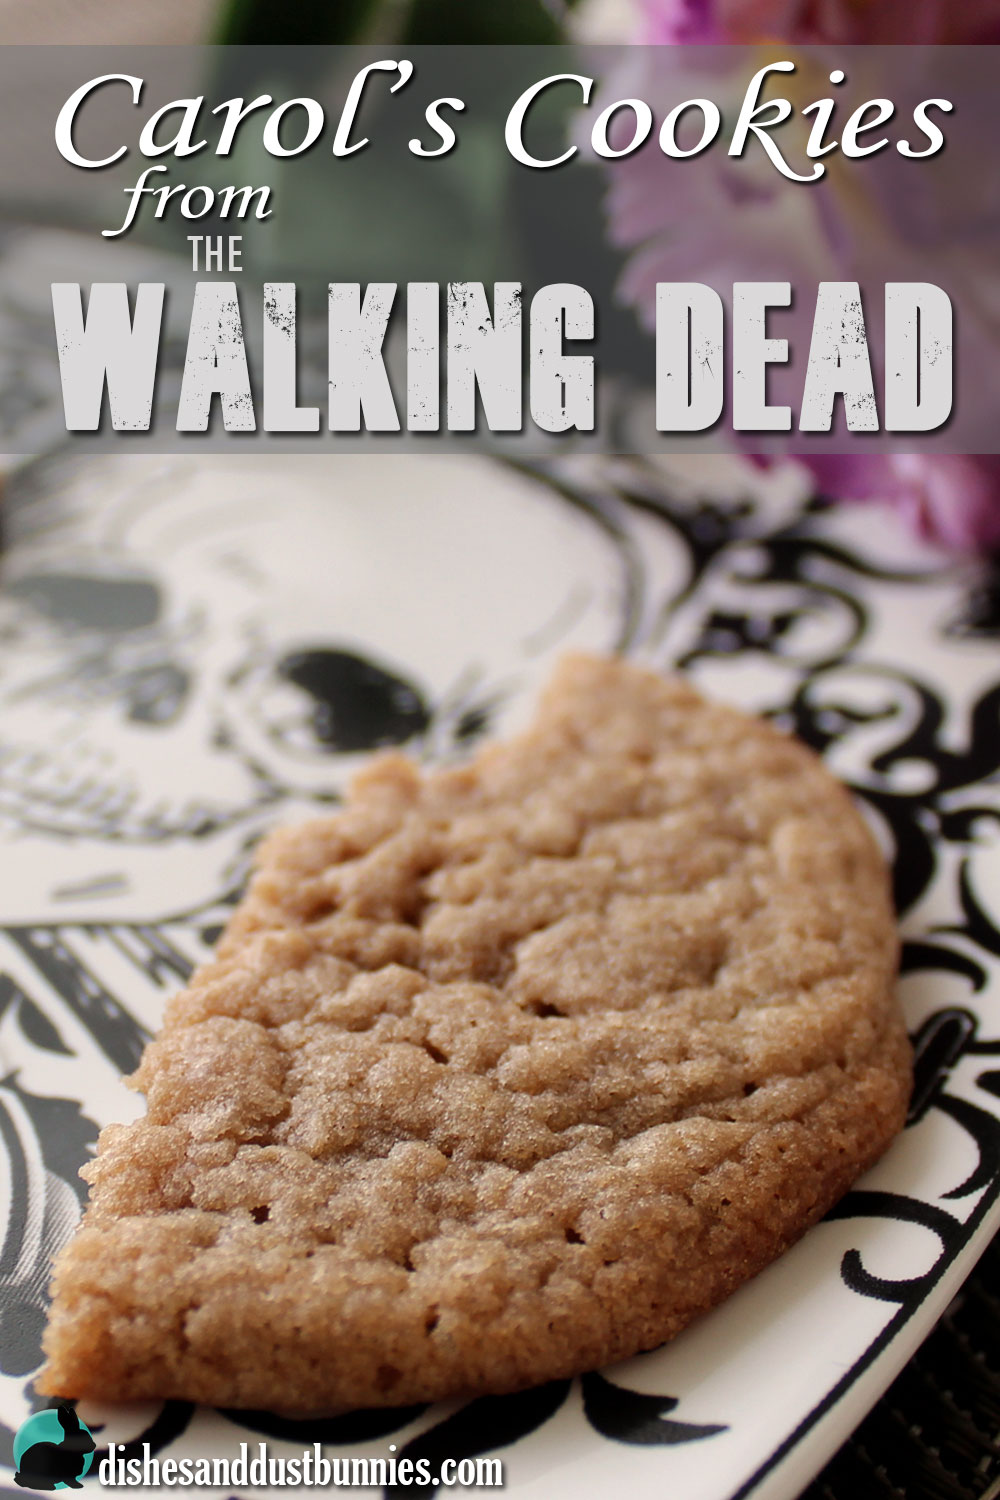 Carol's Cookies from The Walking Dead